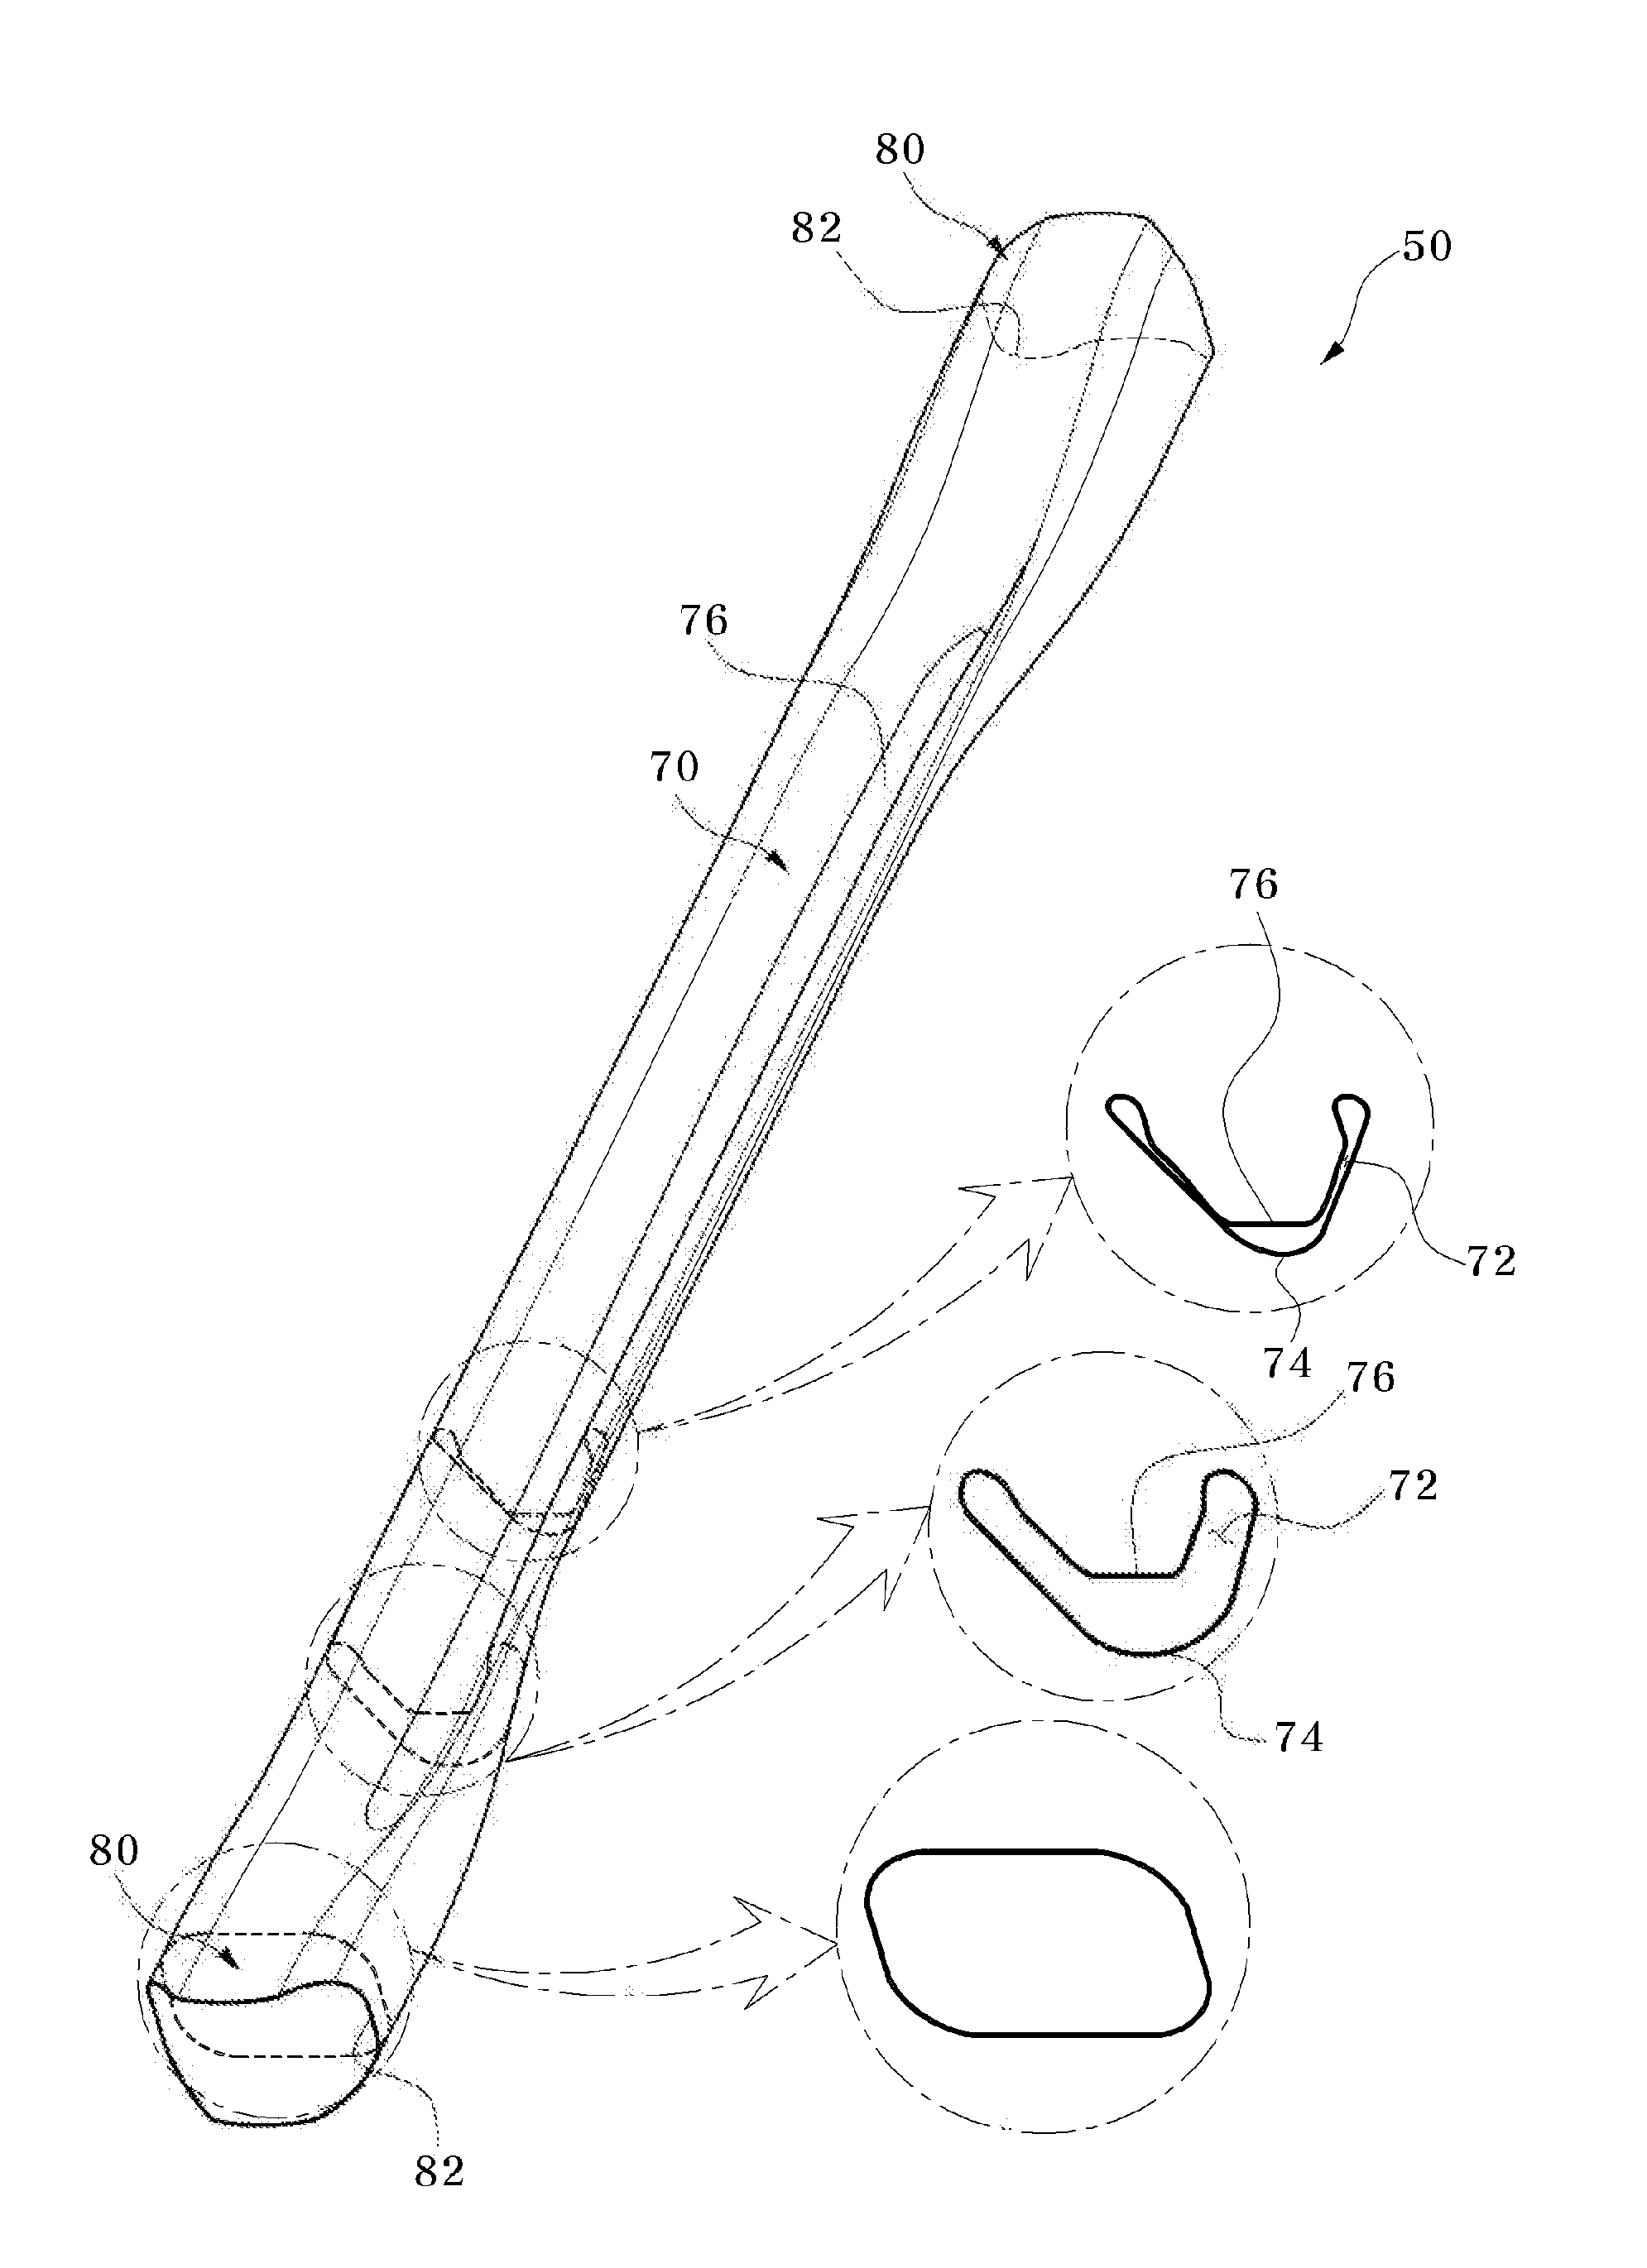 Beam formed of plank and method for manufacturing the same